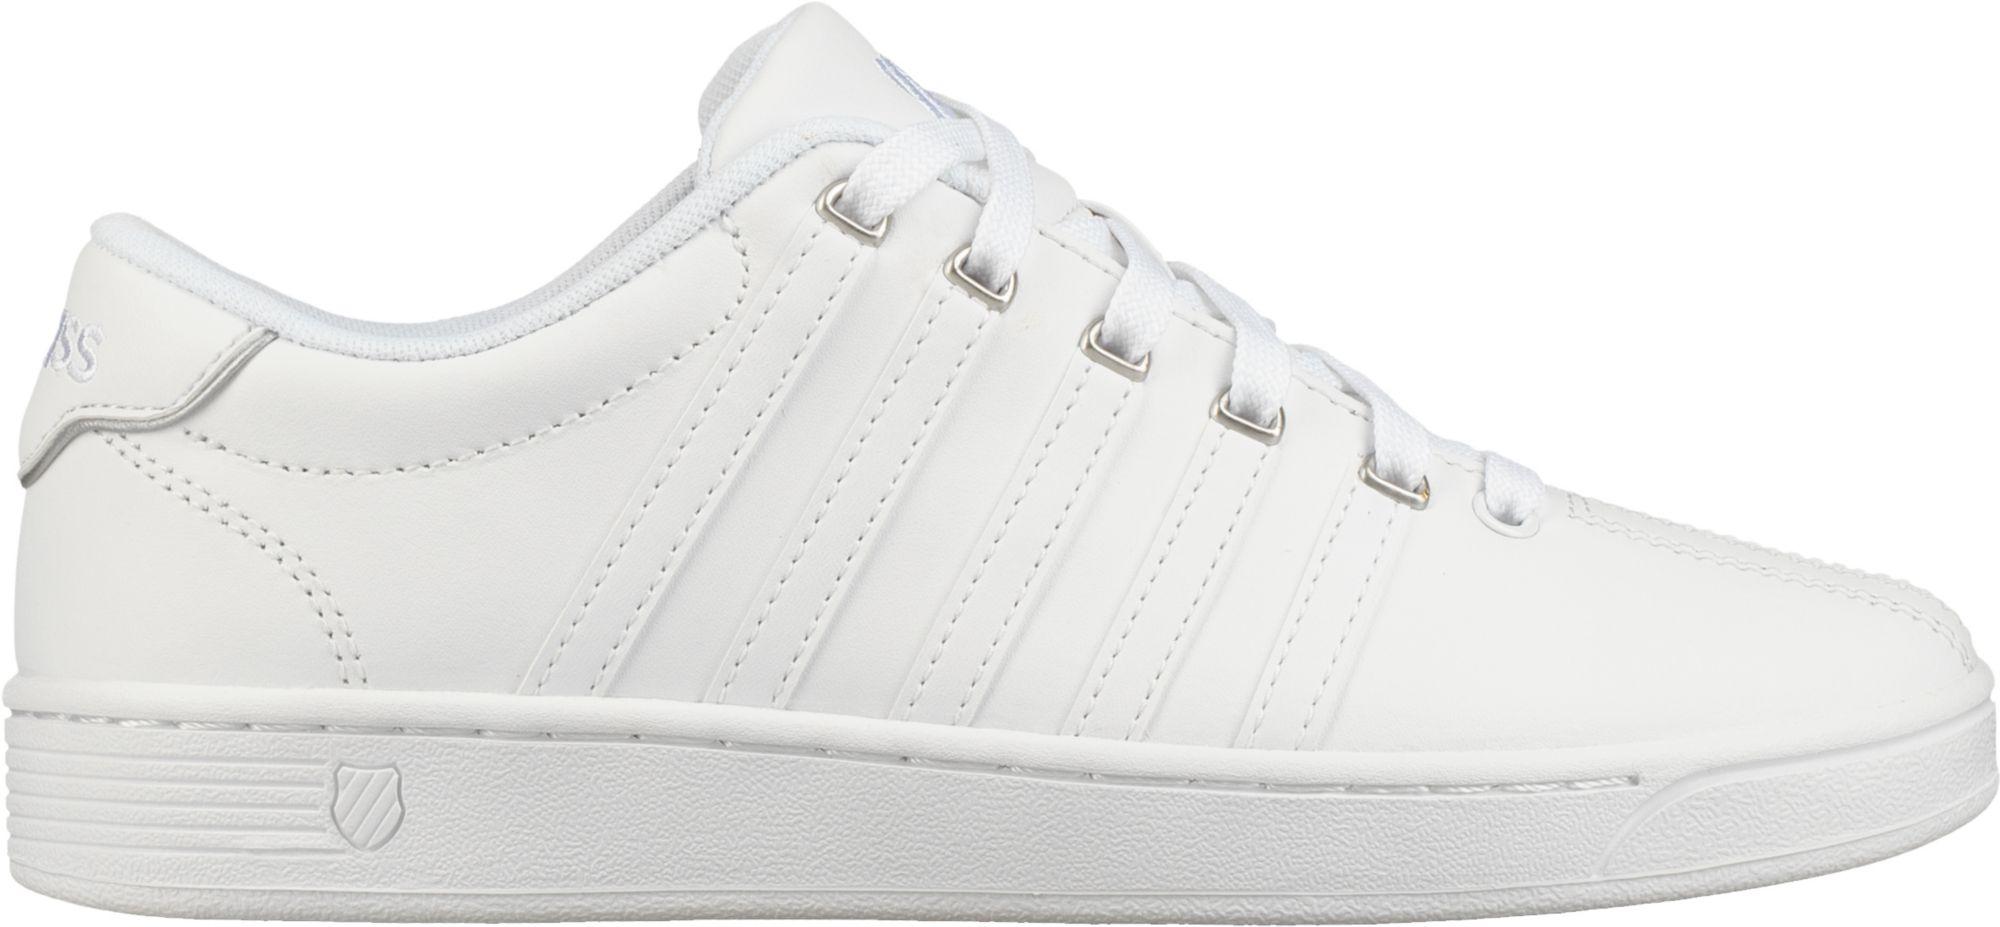 K-swiss Court Pro Ii Shoes in White/Silver (White) for Men - Save 8% - Lyst